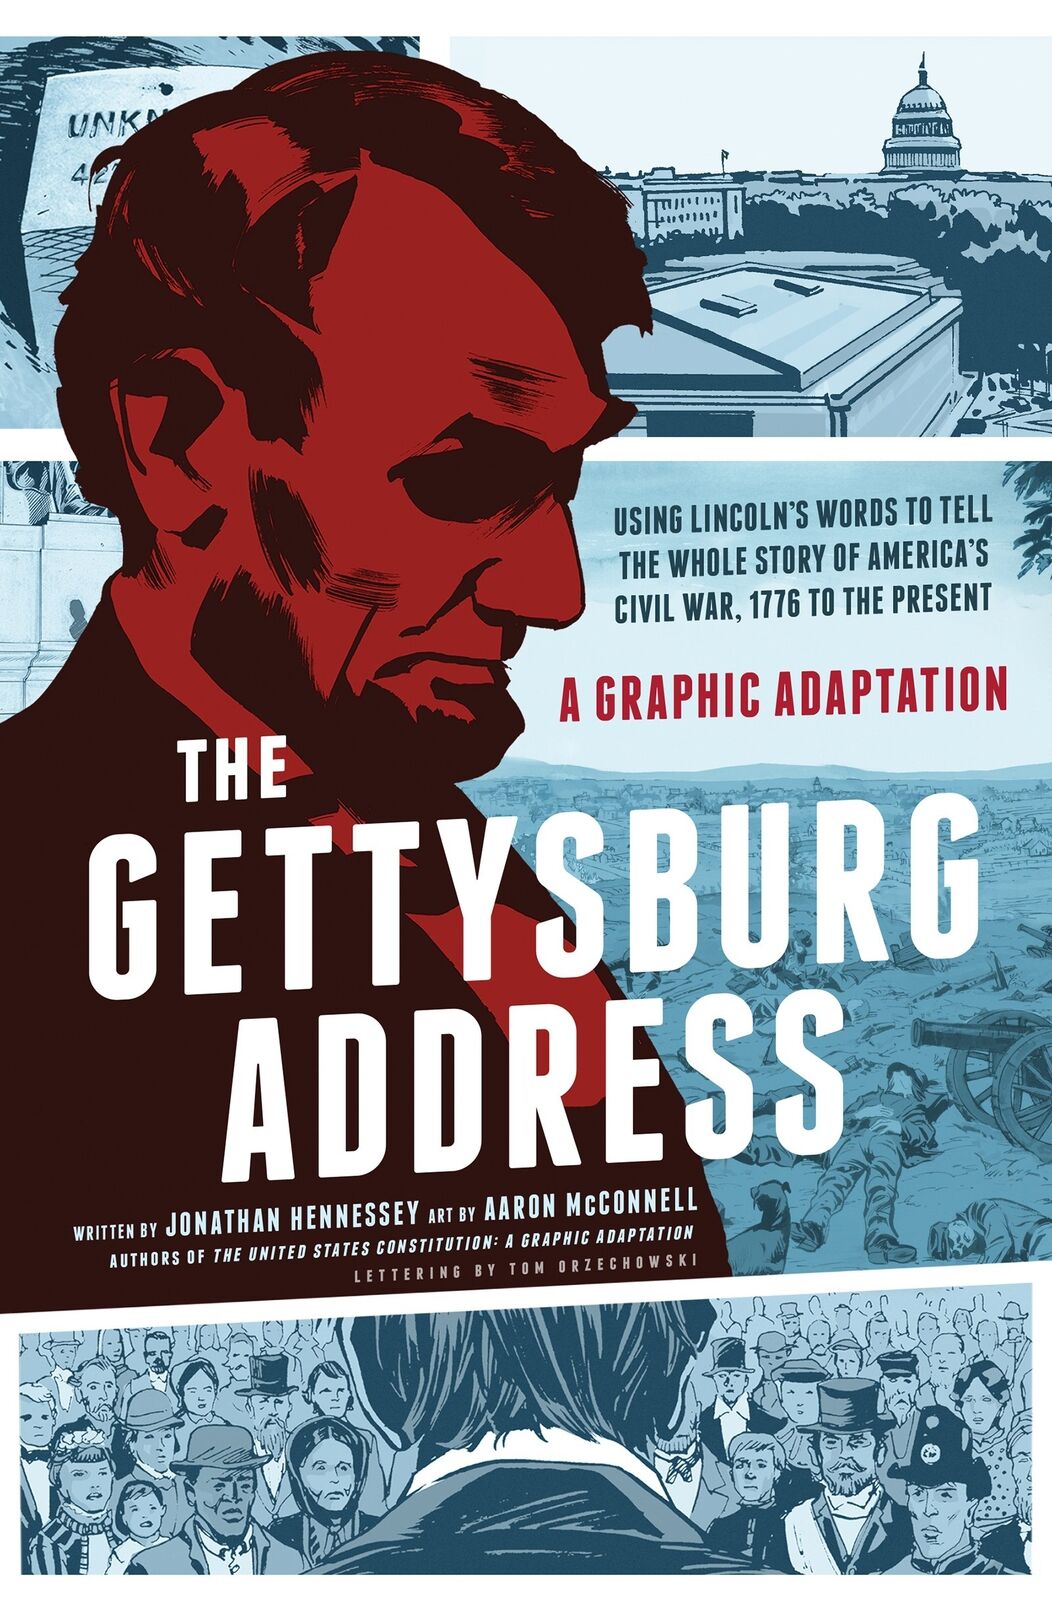 The Gettysburg Address: A Graphic Adaptation by Hennessey, Jonathan (paperback)